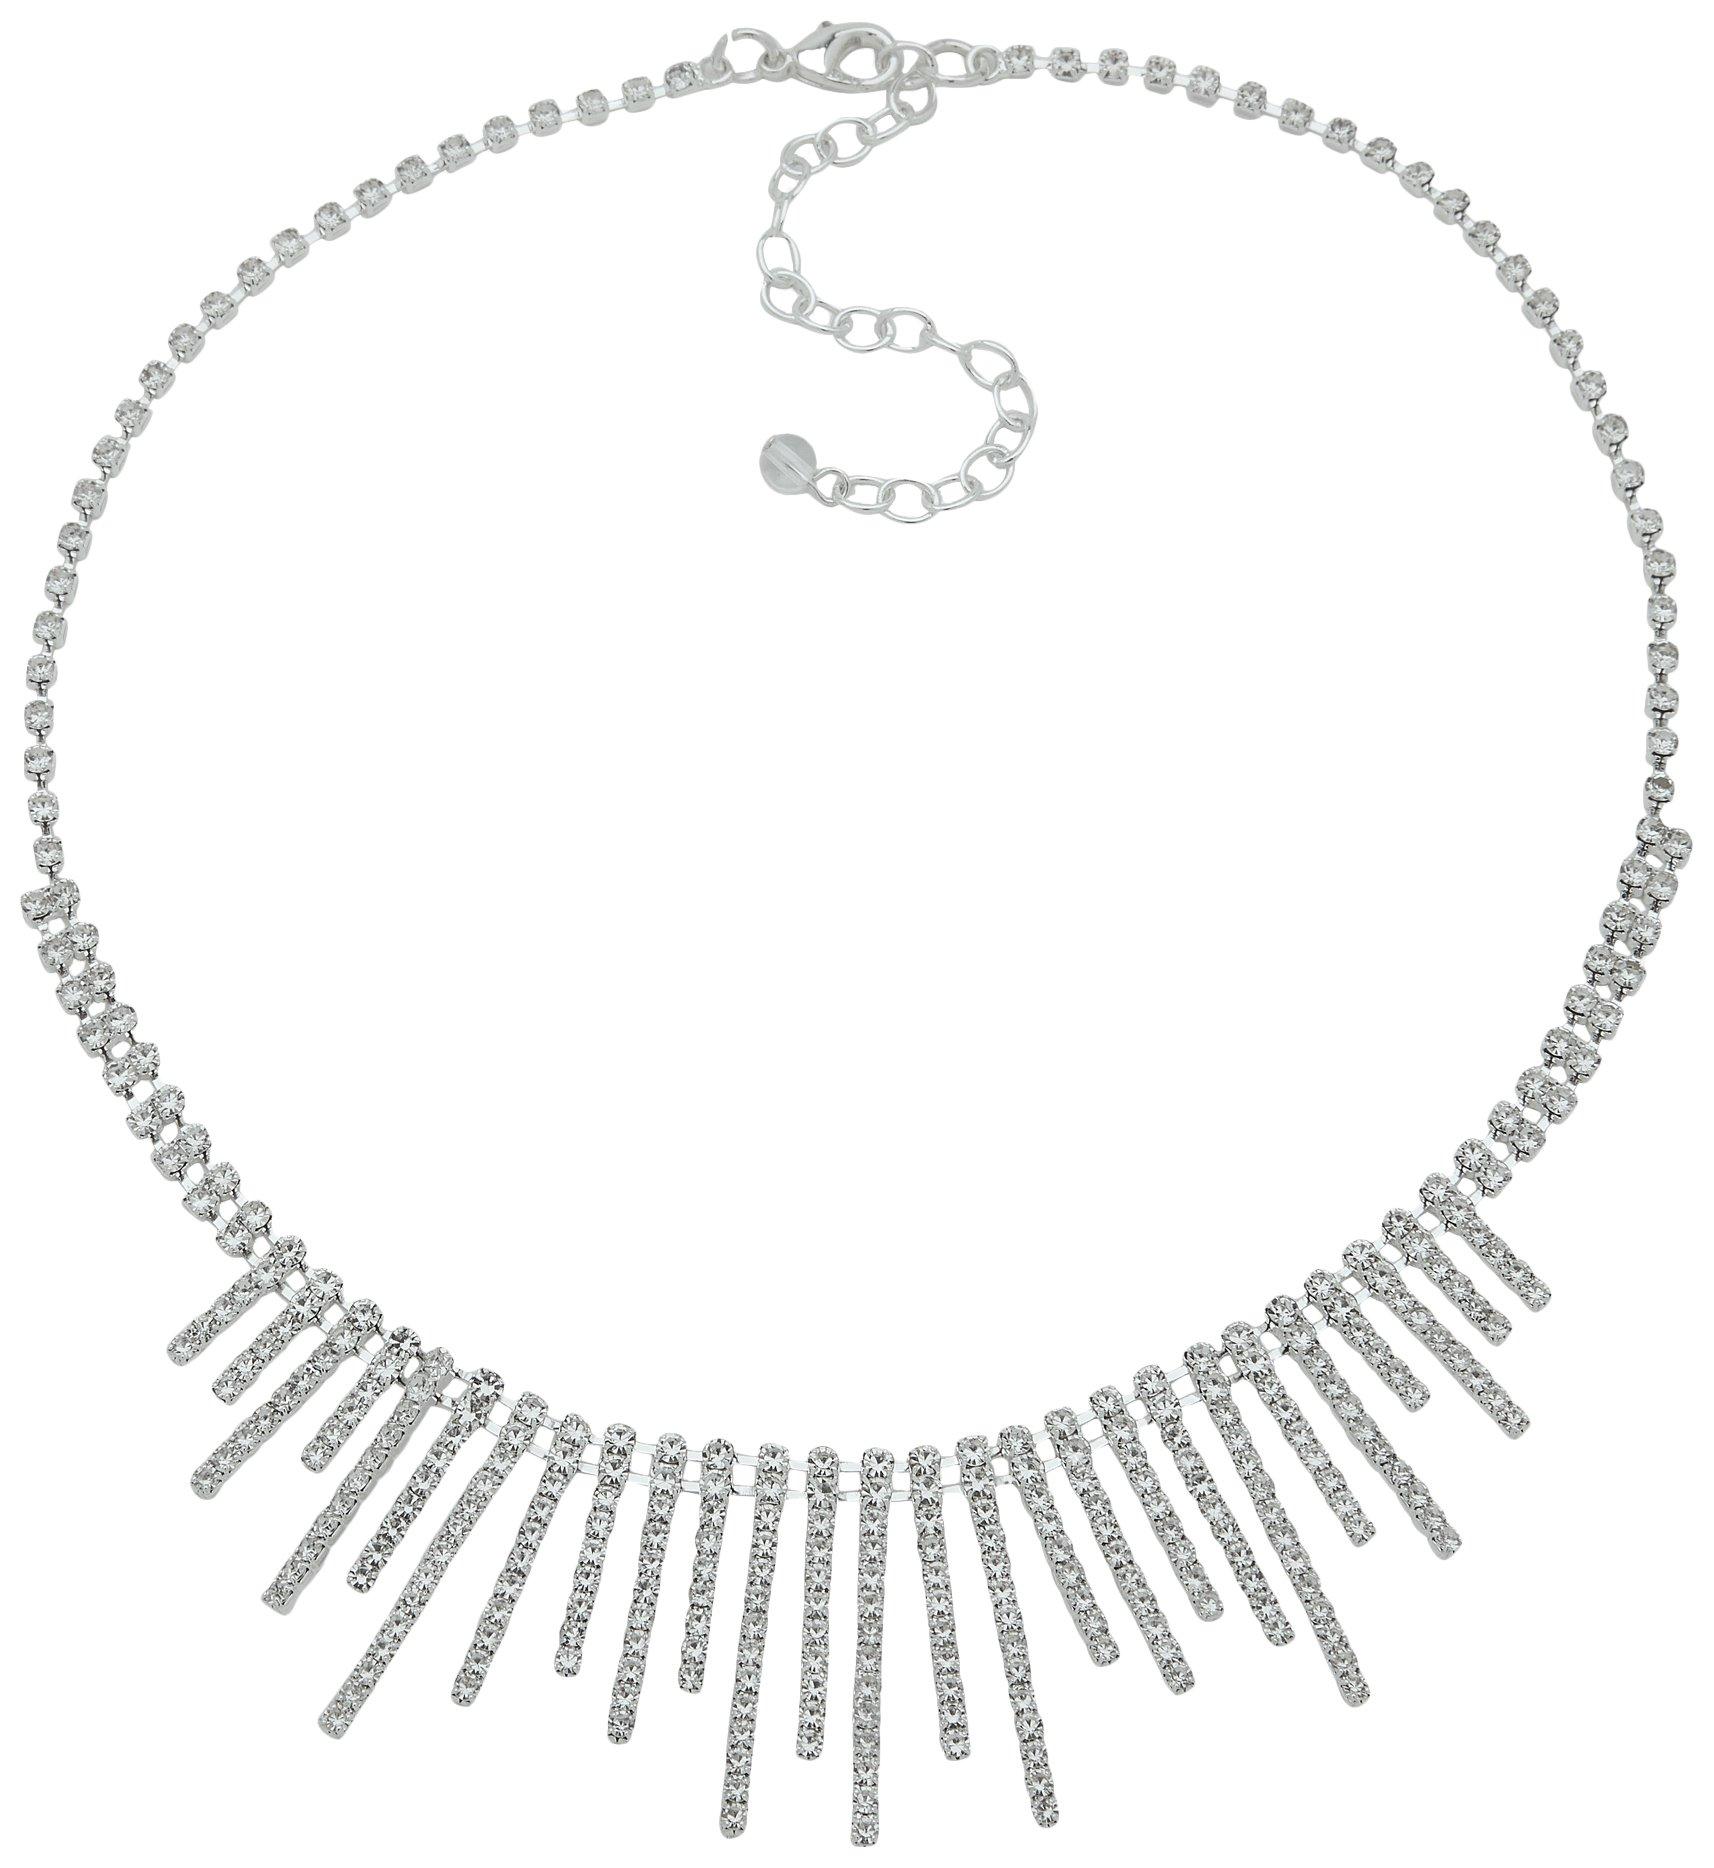 You're Invited Pave Fringe Frontal Necklace